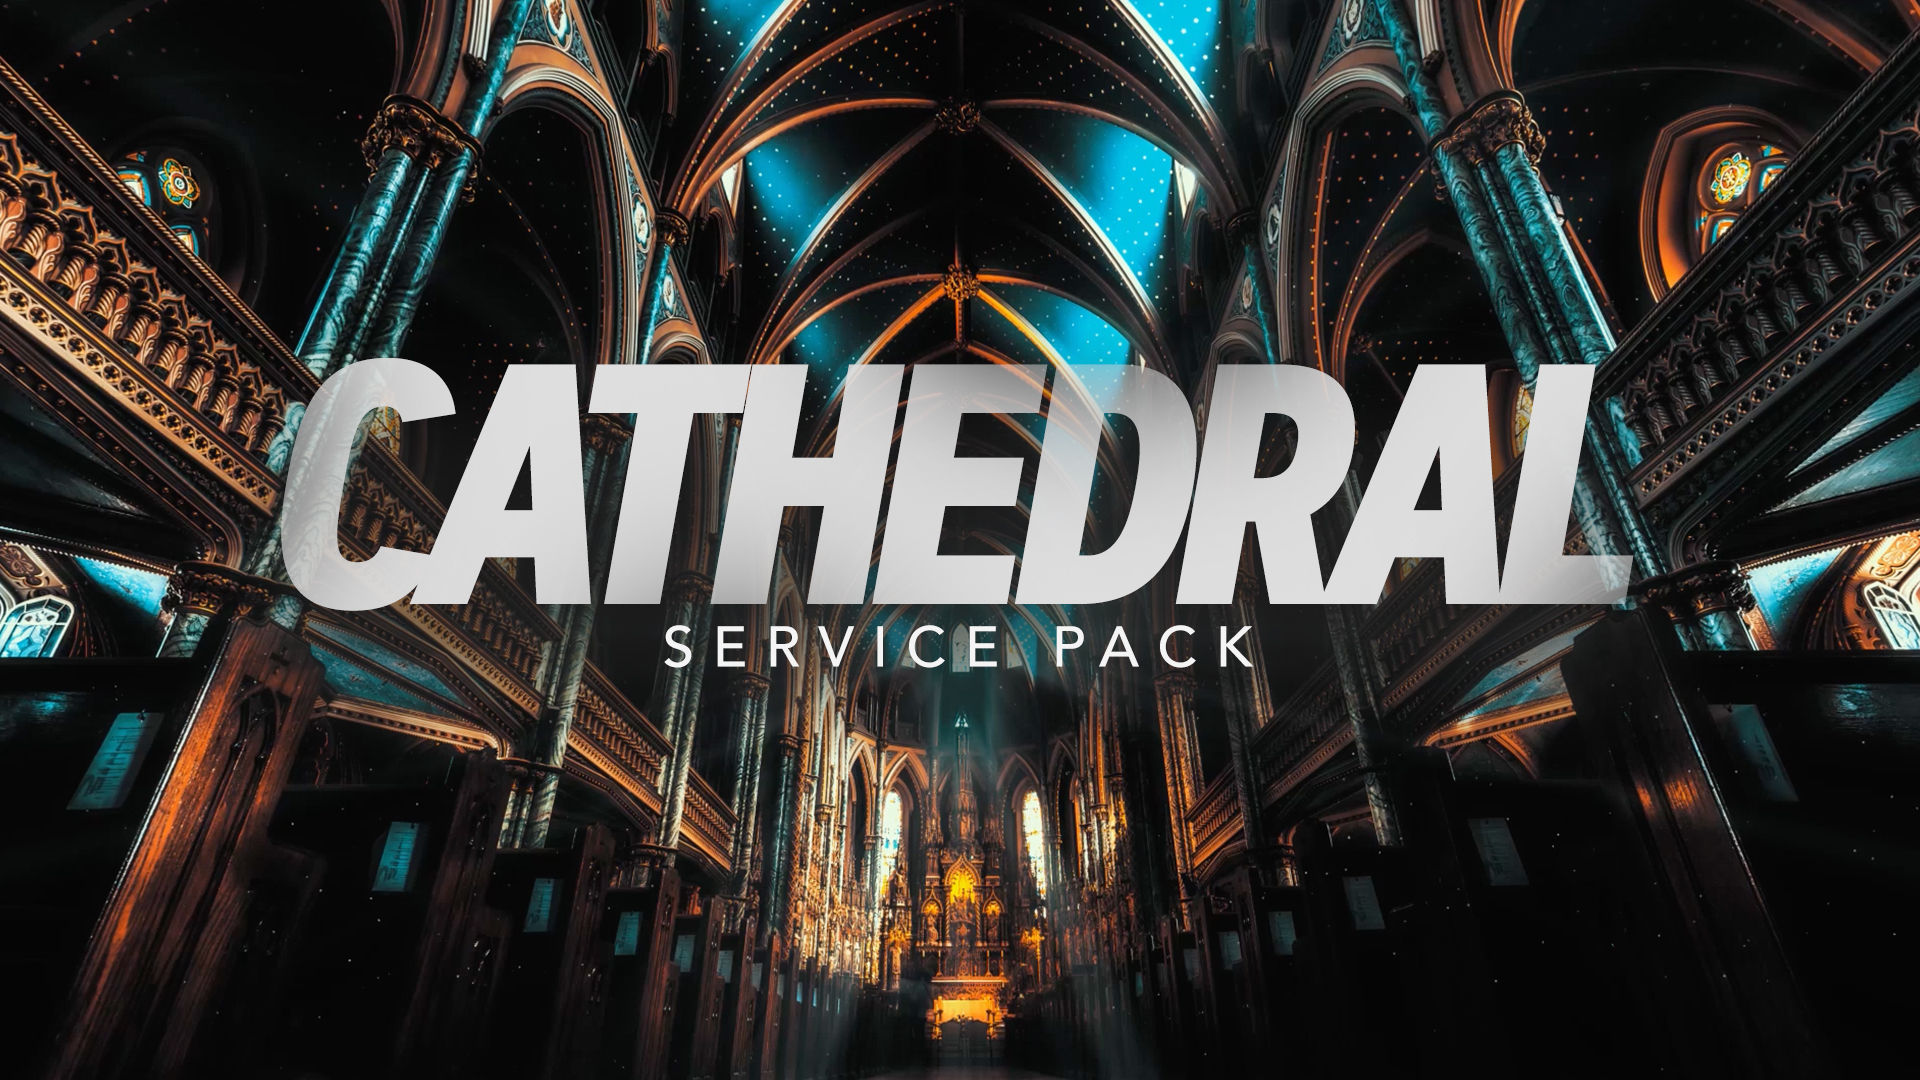 Cathedral Service Pack